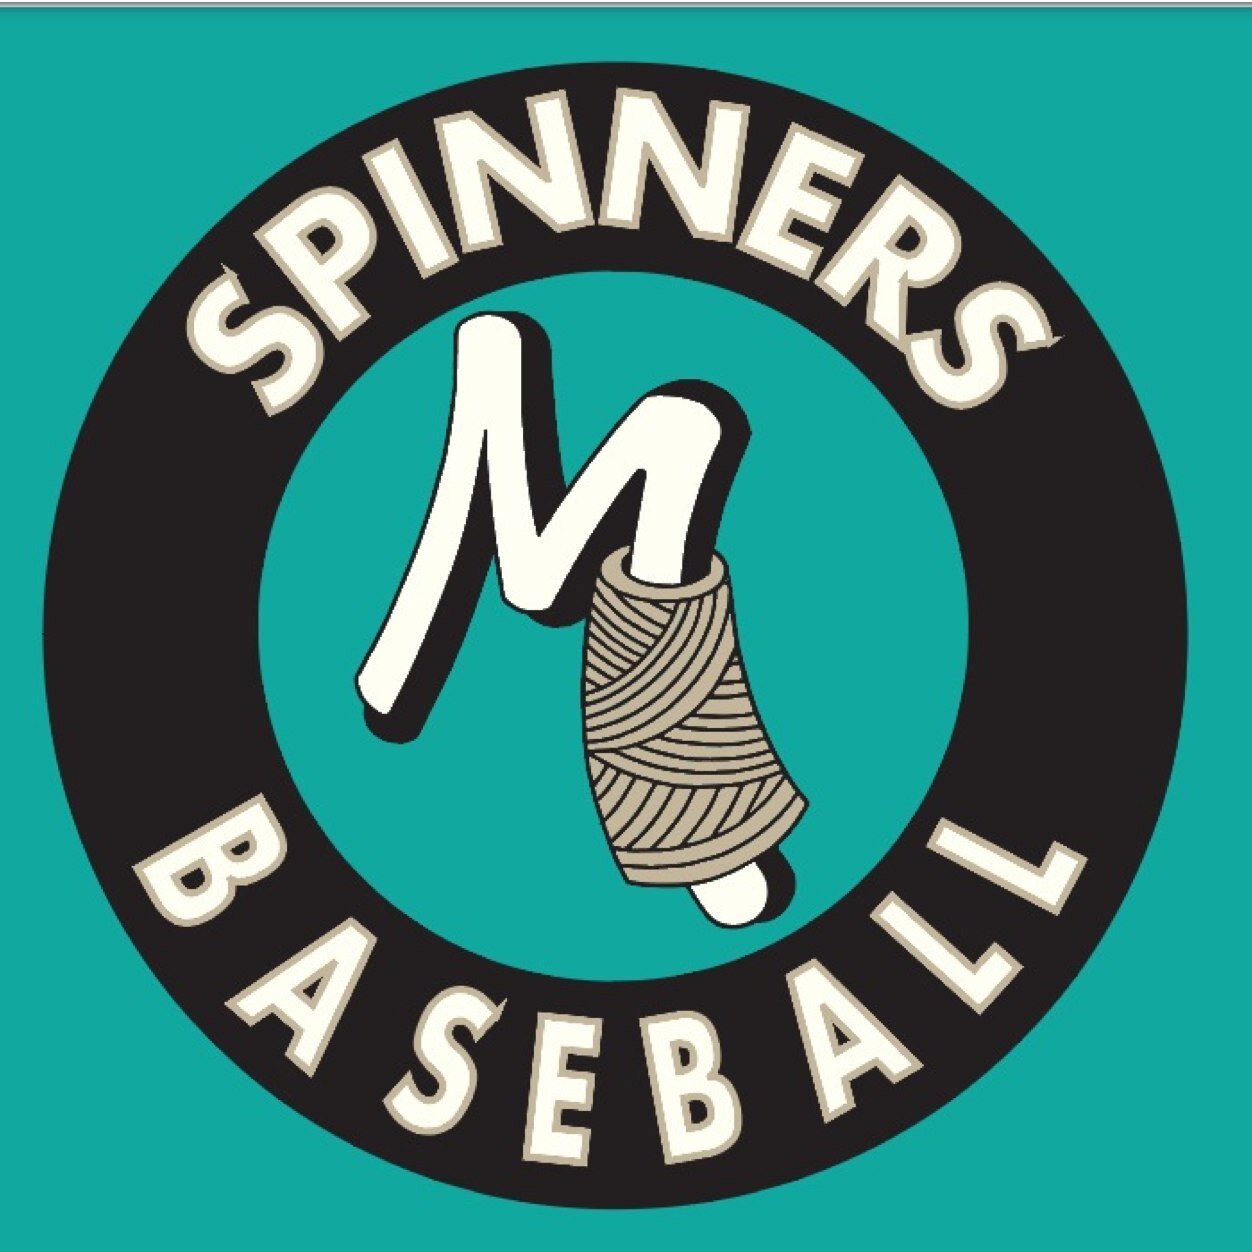 Mooresville Spinners Baseball | Member of The Southern Collegiate Baseball League | 2014 CVCL Champions | 2018, 2021, 2022 & 2023 SCBL Champions🏆